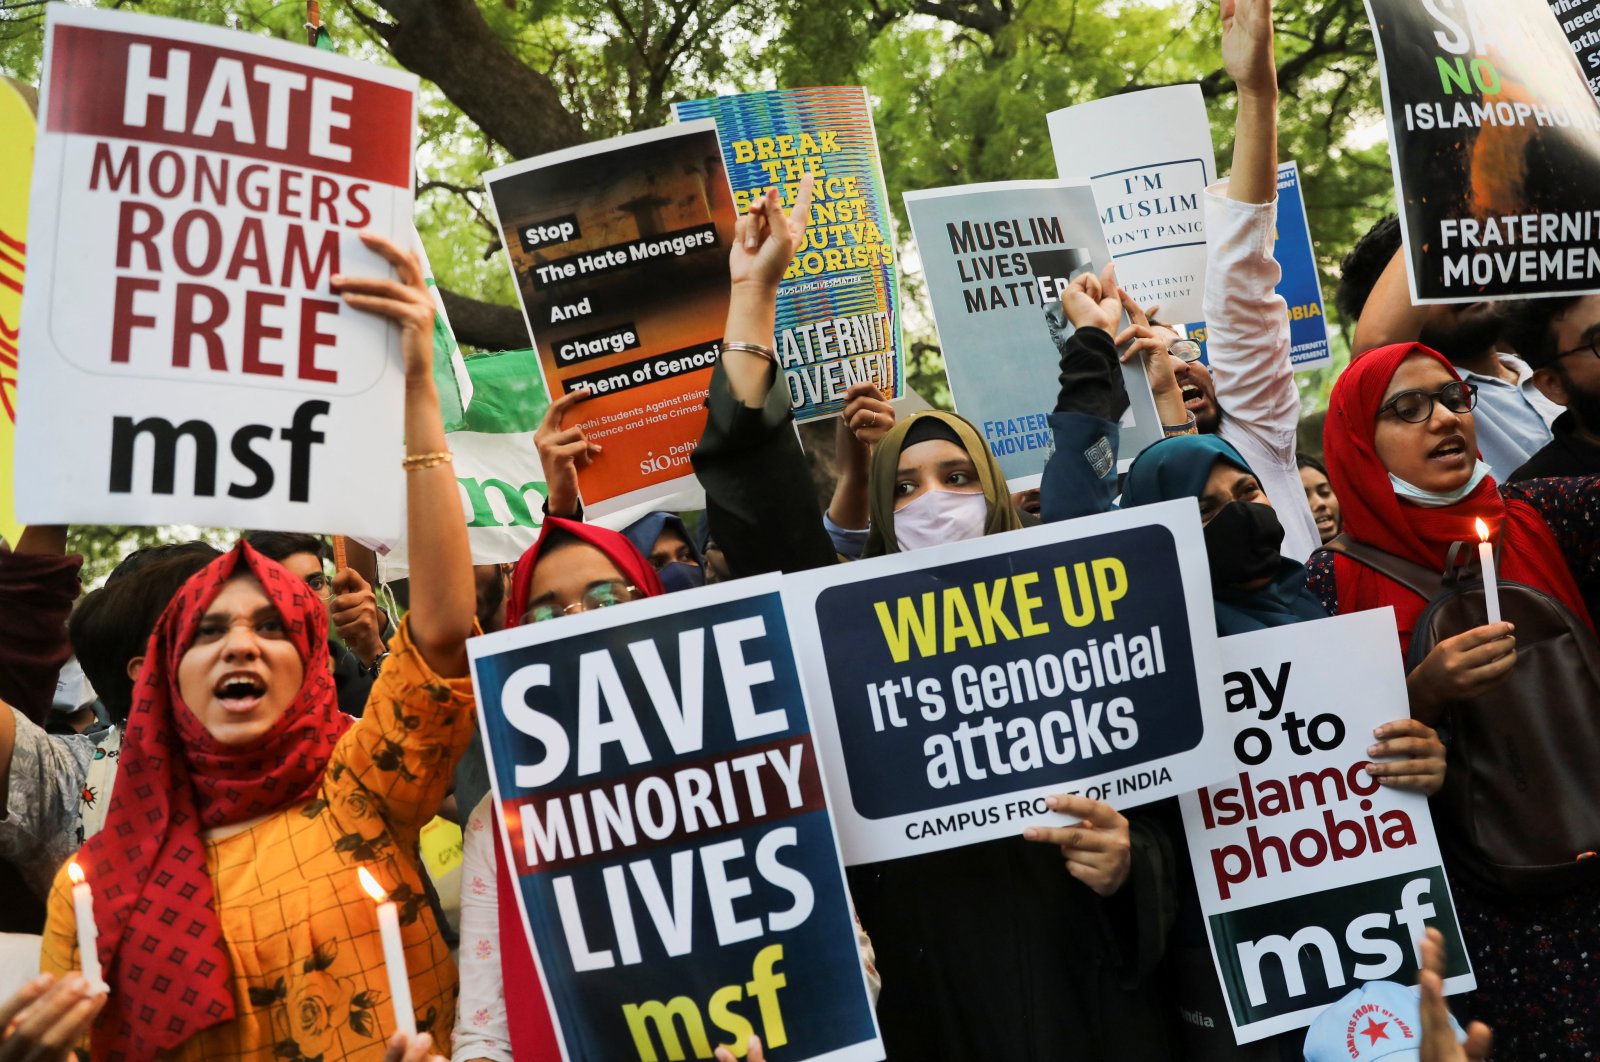 Citizens shout slogans and hold placards during a peace vigil organized by citizens against hate crimes and violence against Muslims, New Delhi, India, April 16, 2022. (Reuters Photo)